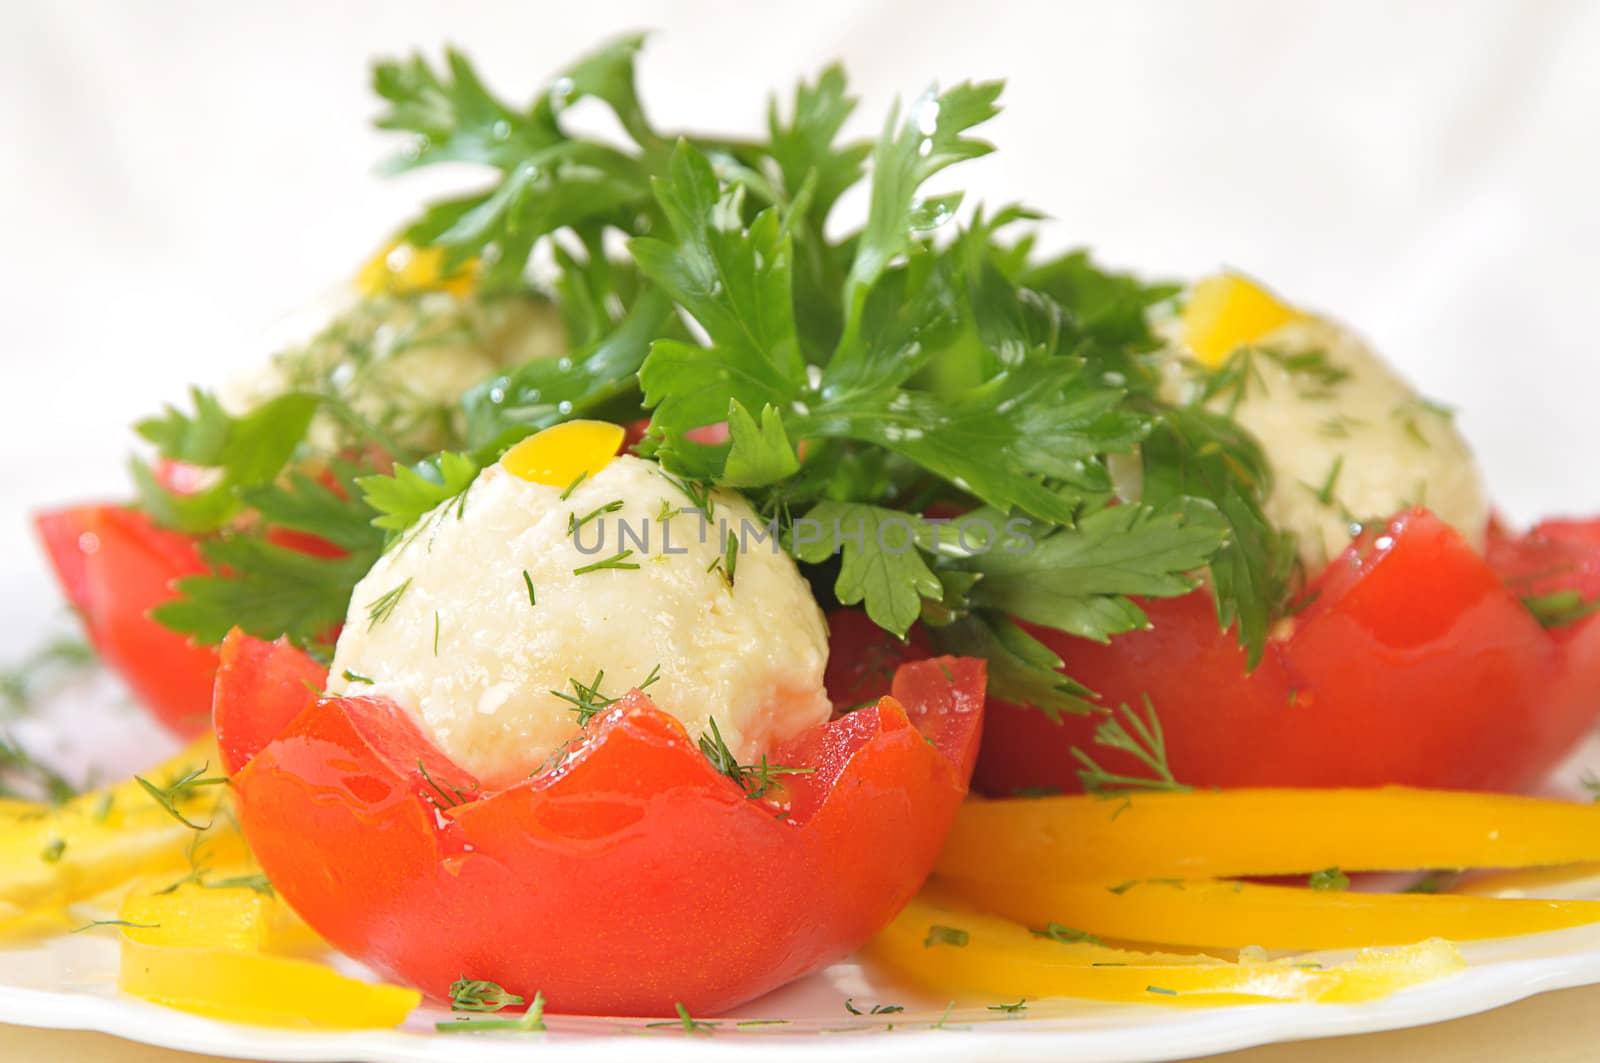 red tomatoes with cheese marbles by dyoma